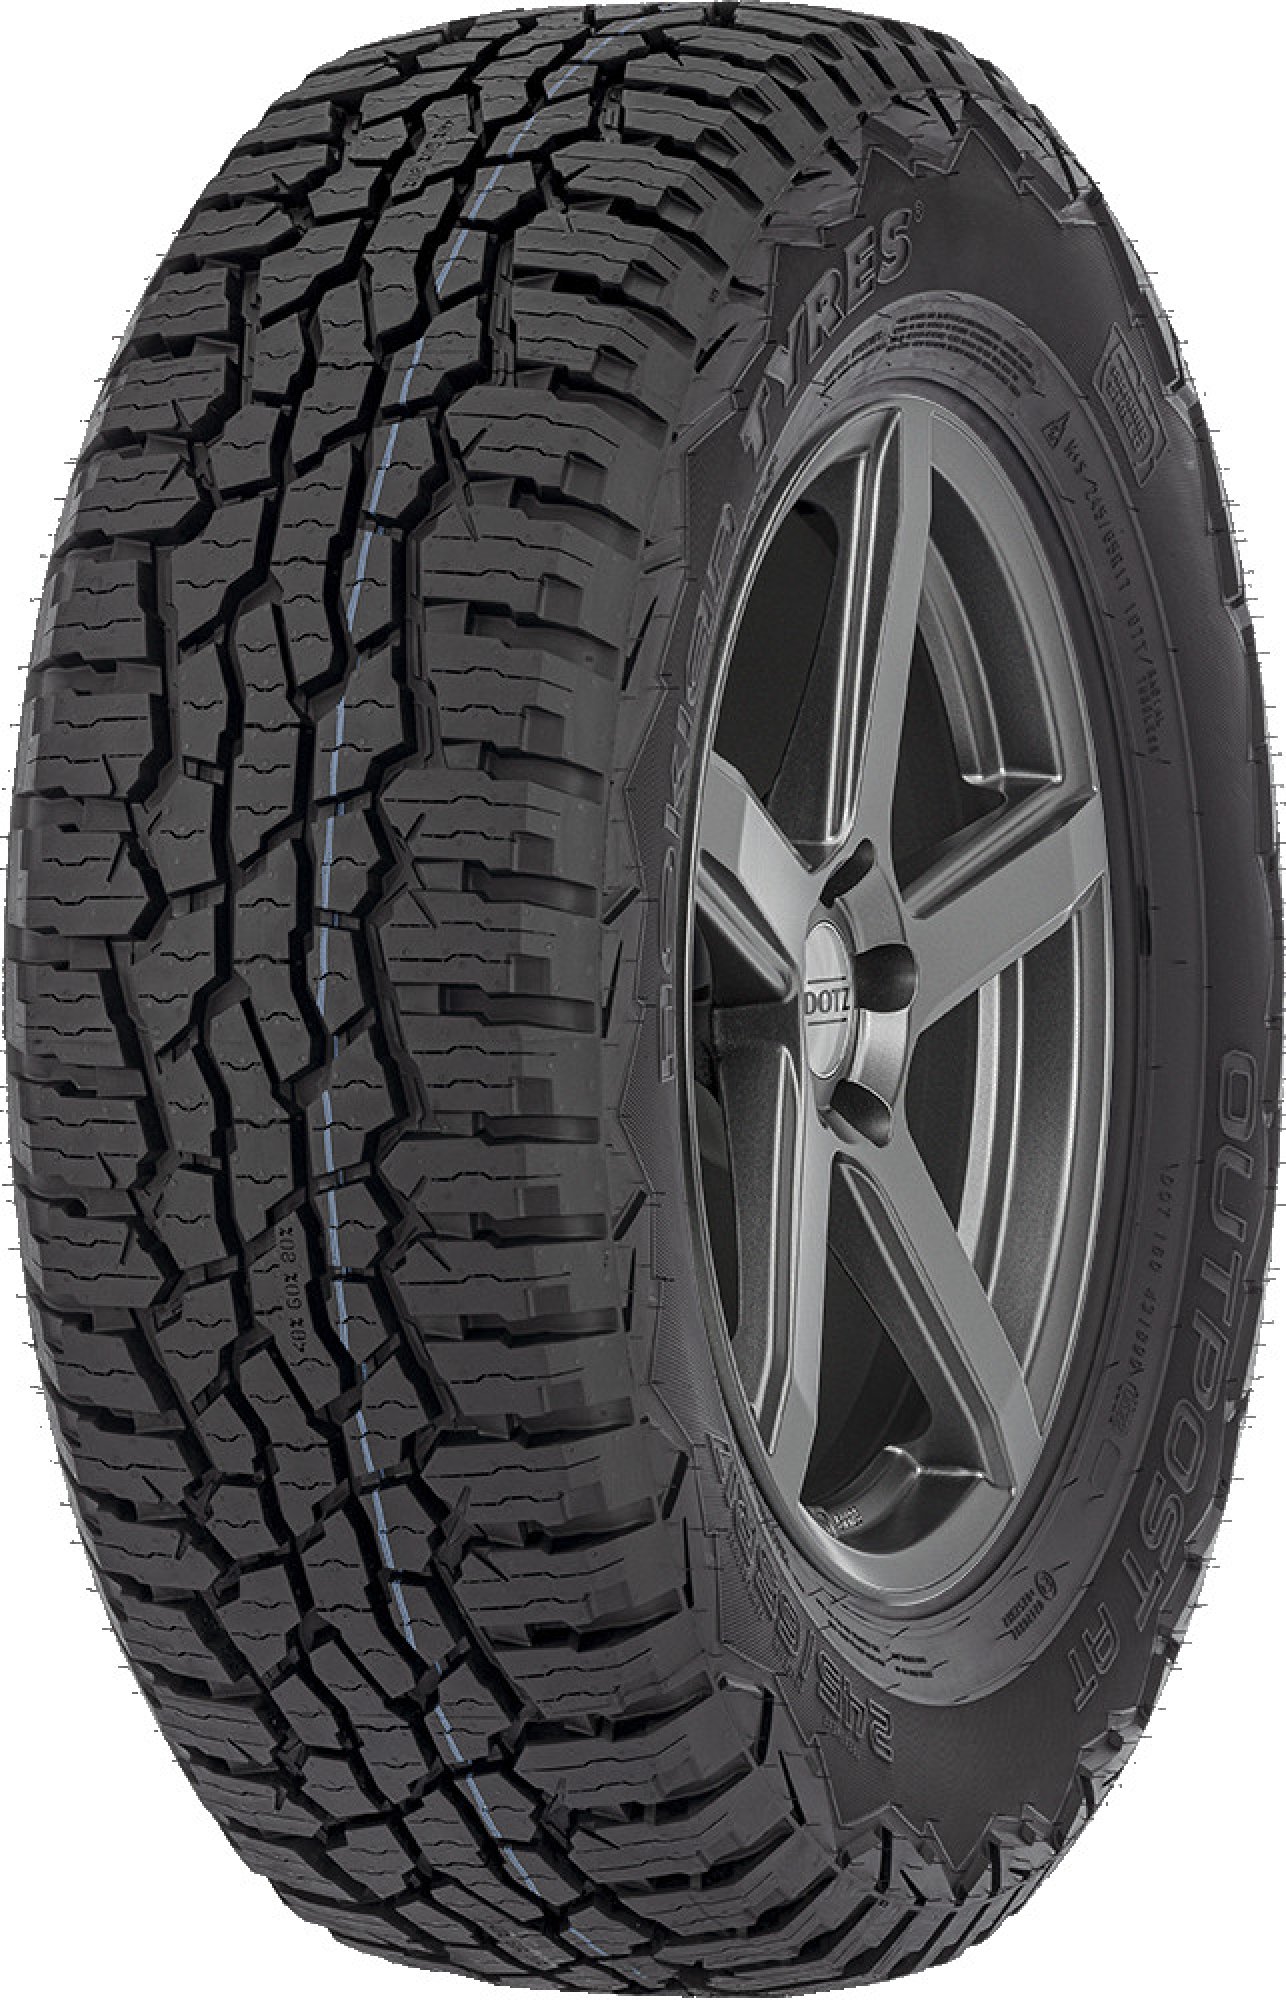 NOKIAN TYRES OUTPOST AT 245/75 R 17 121/118S